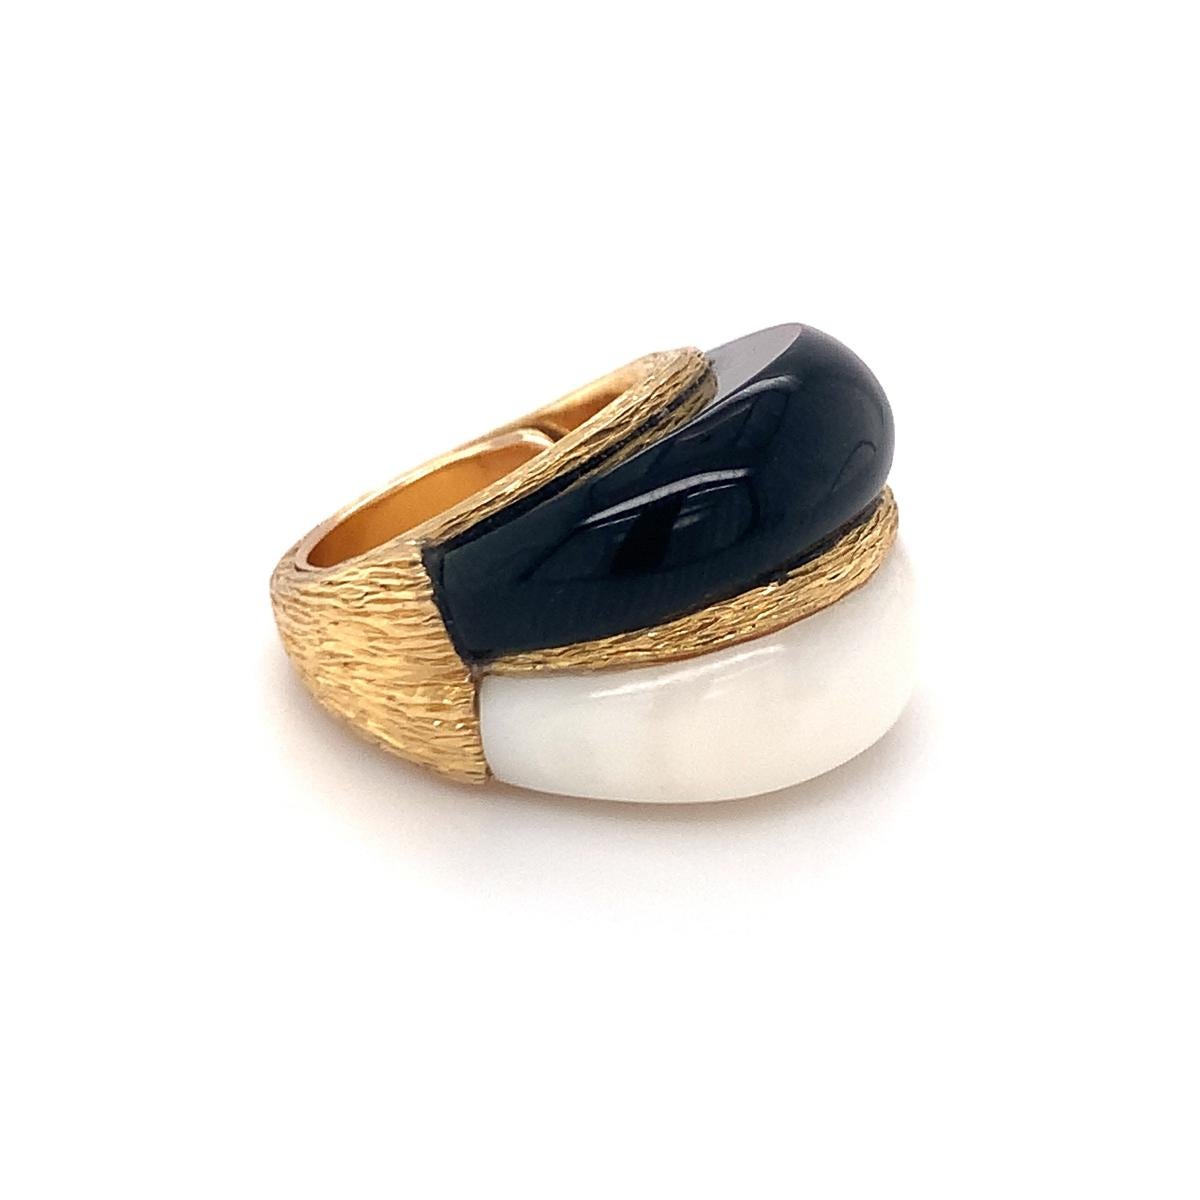 White Coral and Black Onyx Bombe 18K Yellow Gold Ring, circa 1960s For Sale 2